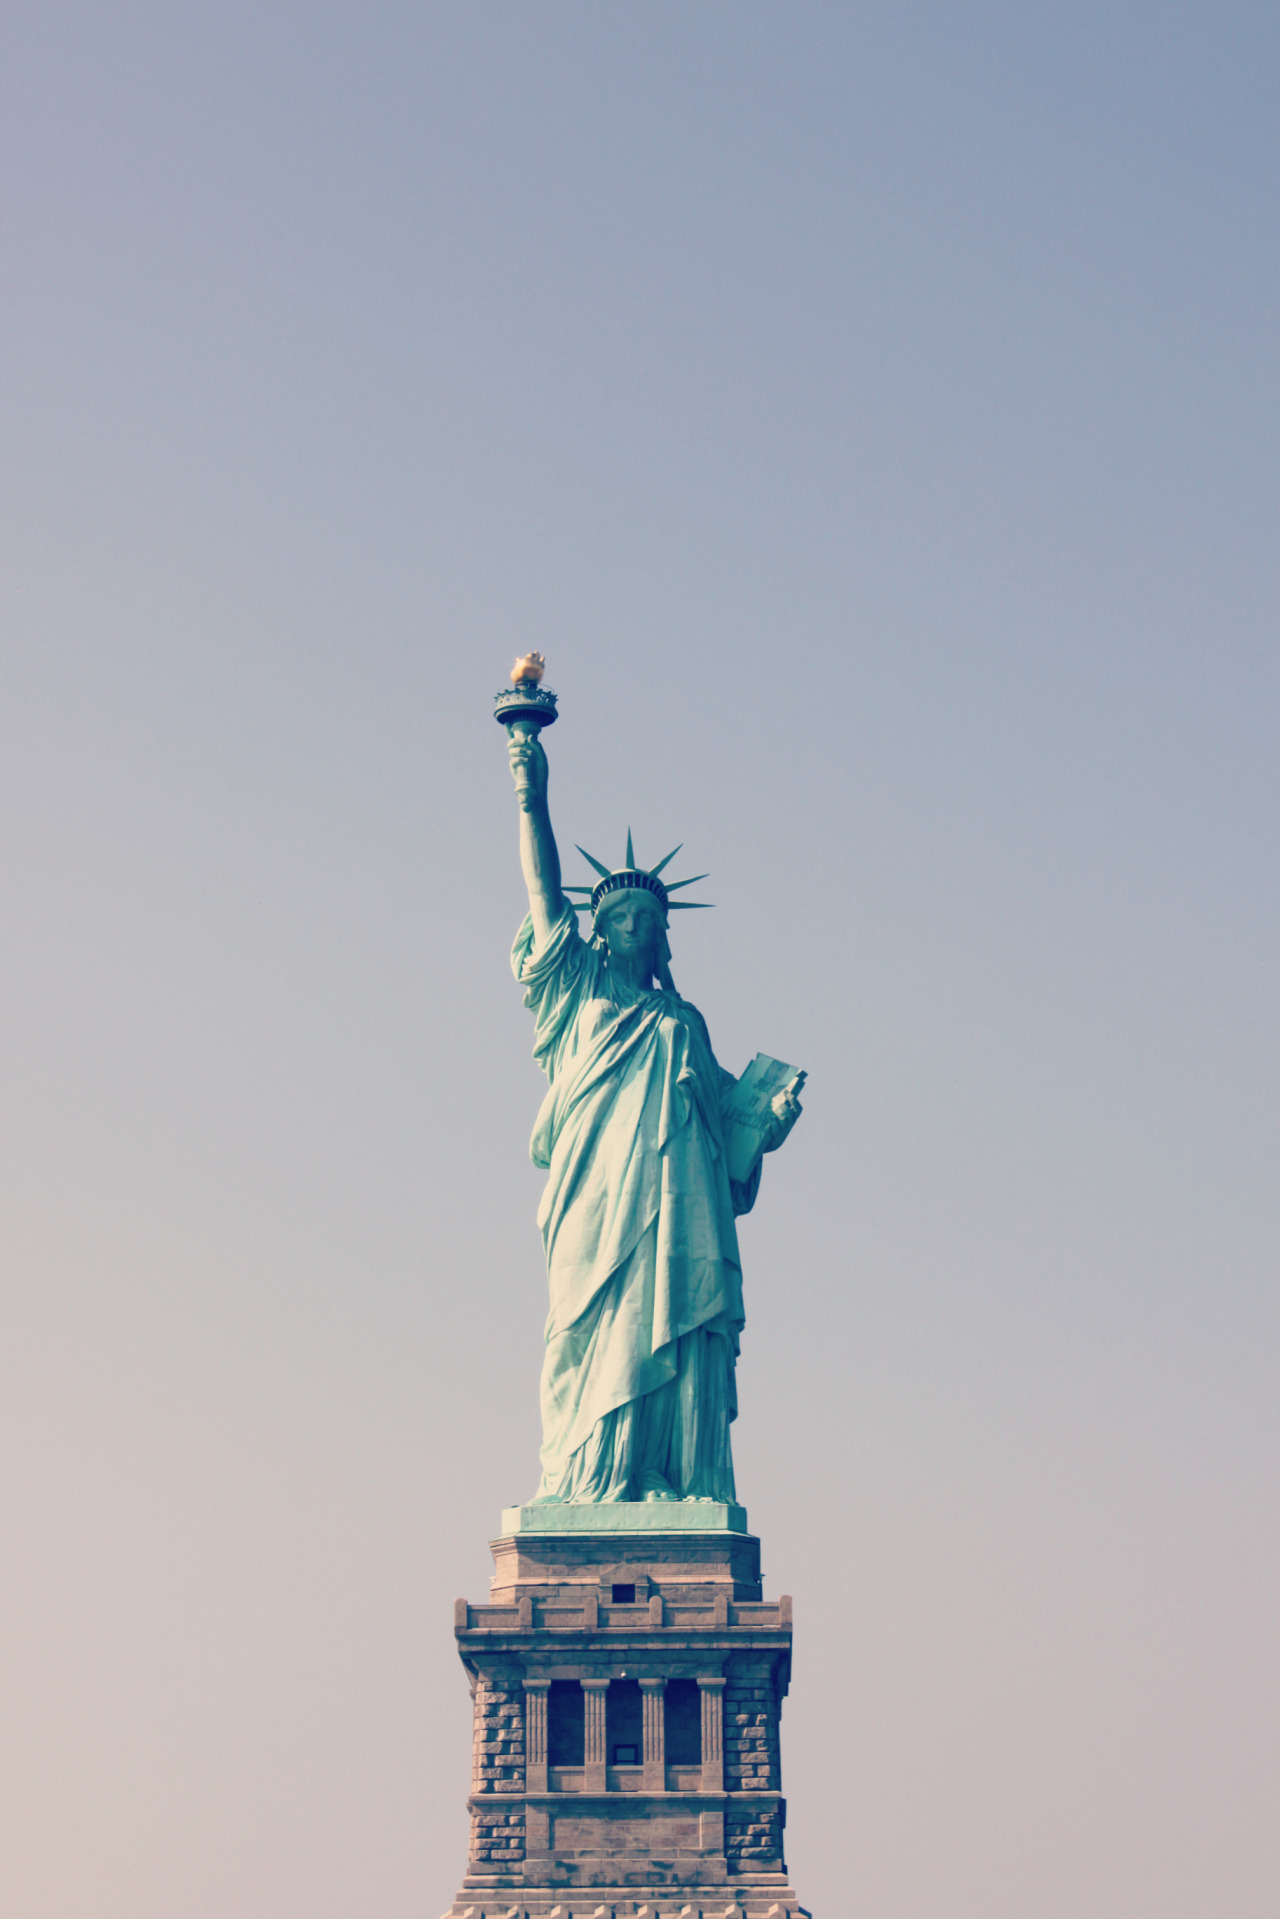 Amazing Places - Statue of Liberty - New York - USA (by CameliaTWU)1280 x 1919